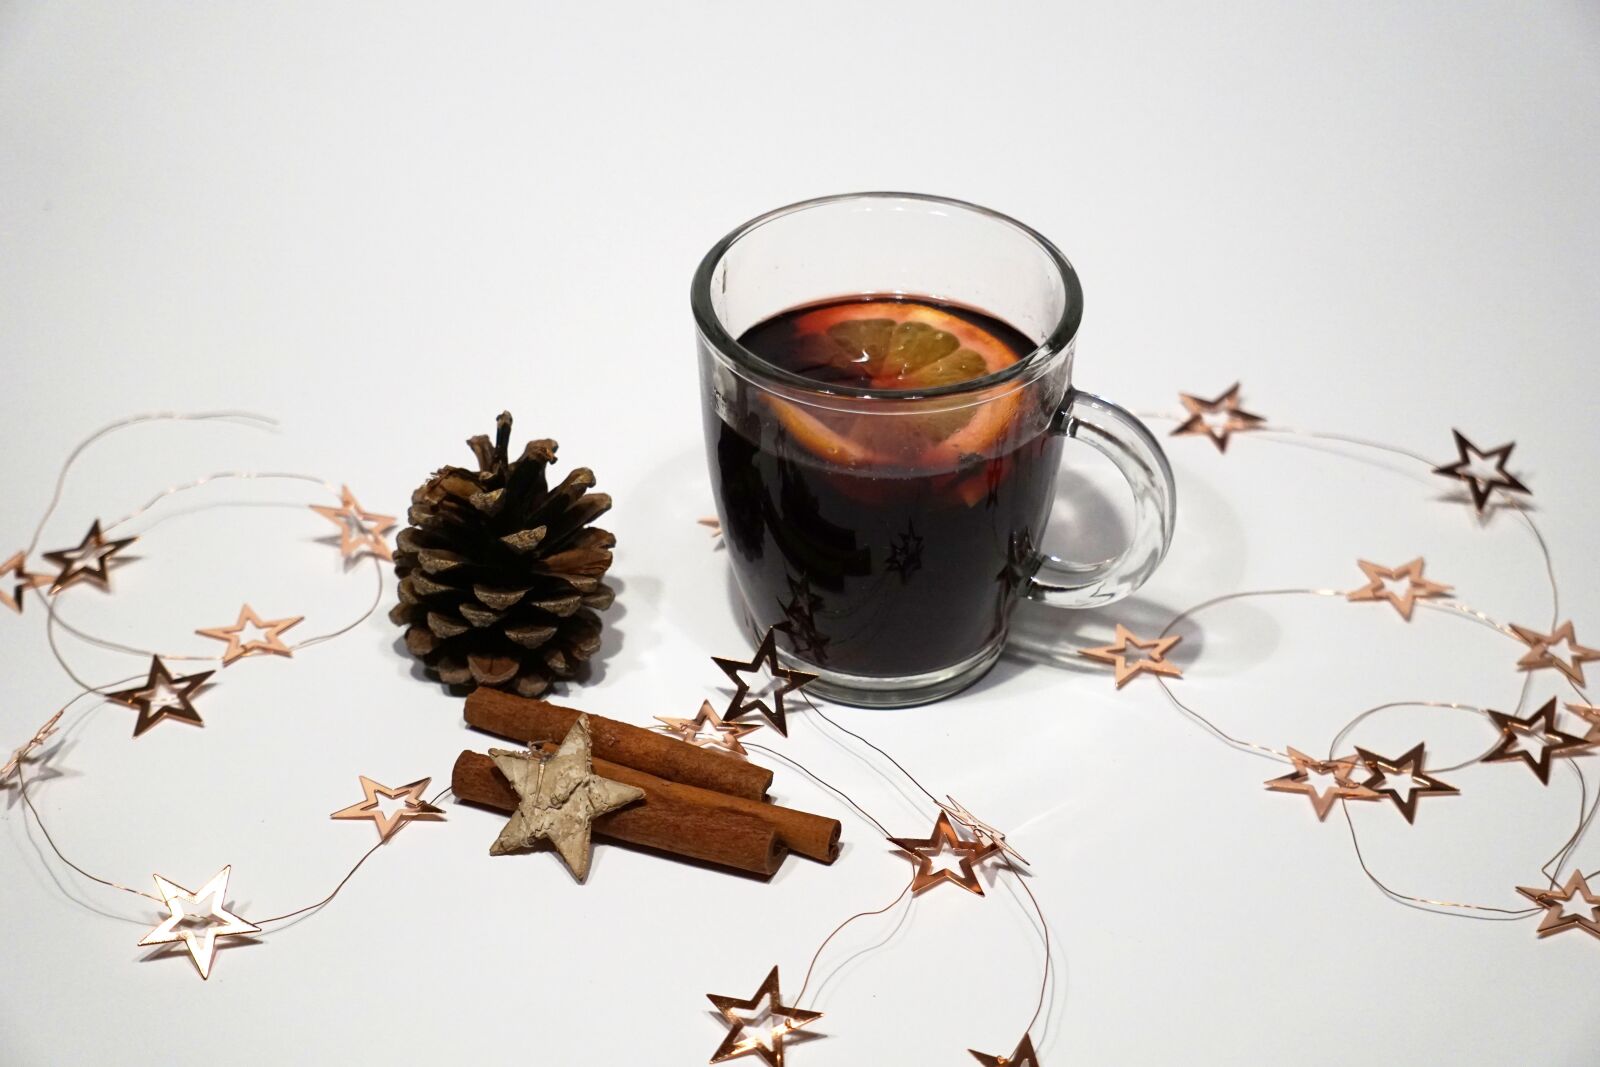 Sony a6000 sample photo. Mulled claret, winter, cold photography